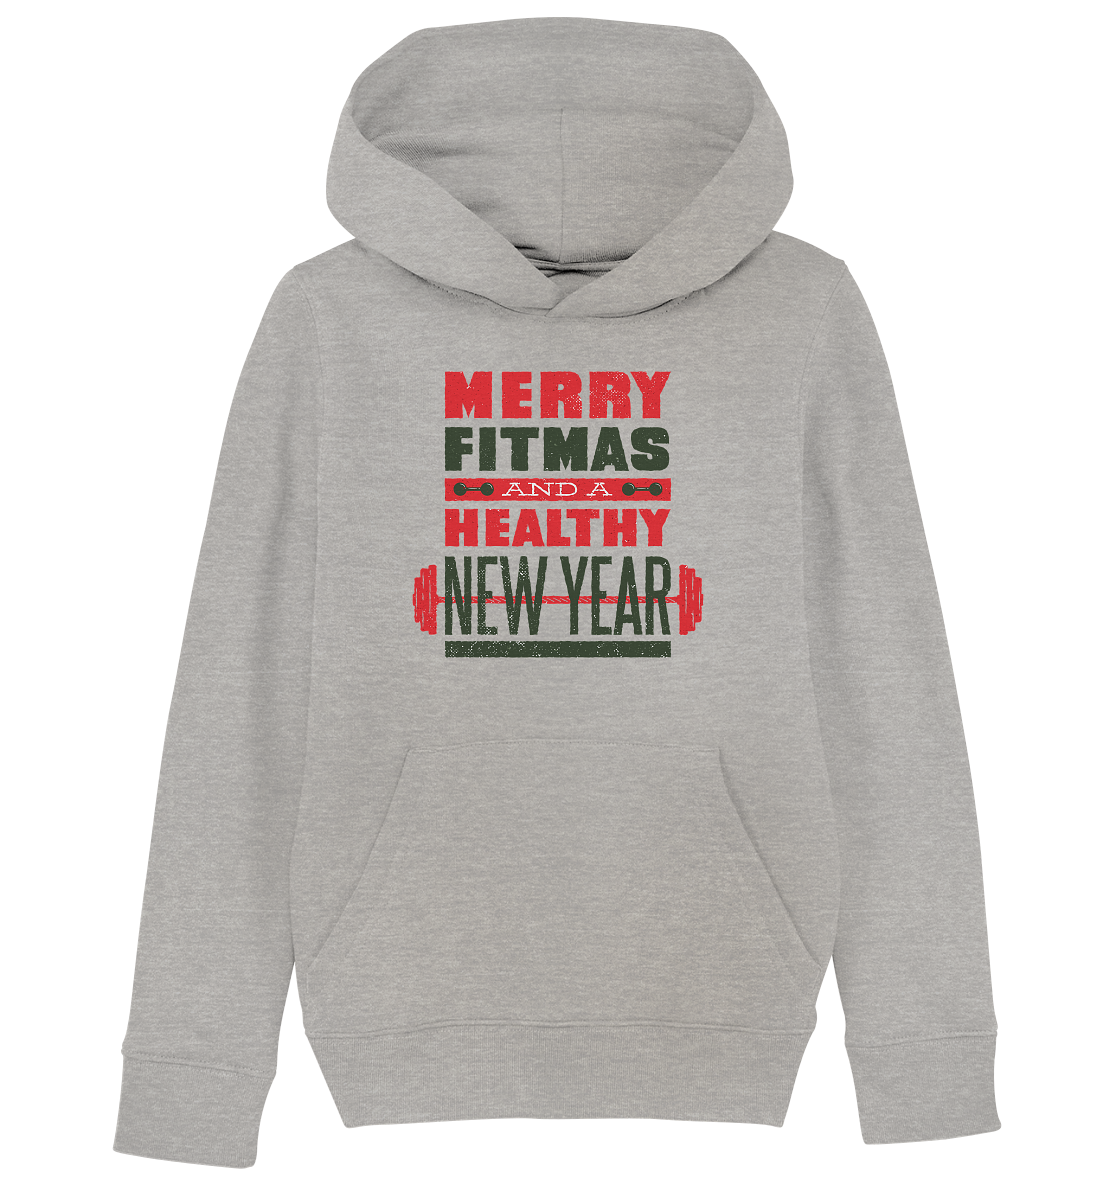 Christmas design, Gym, Merry Fitmas and a Healthy New Year - Kids Organic Hoodie